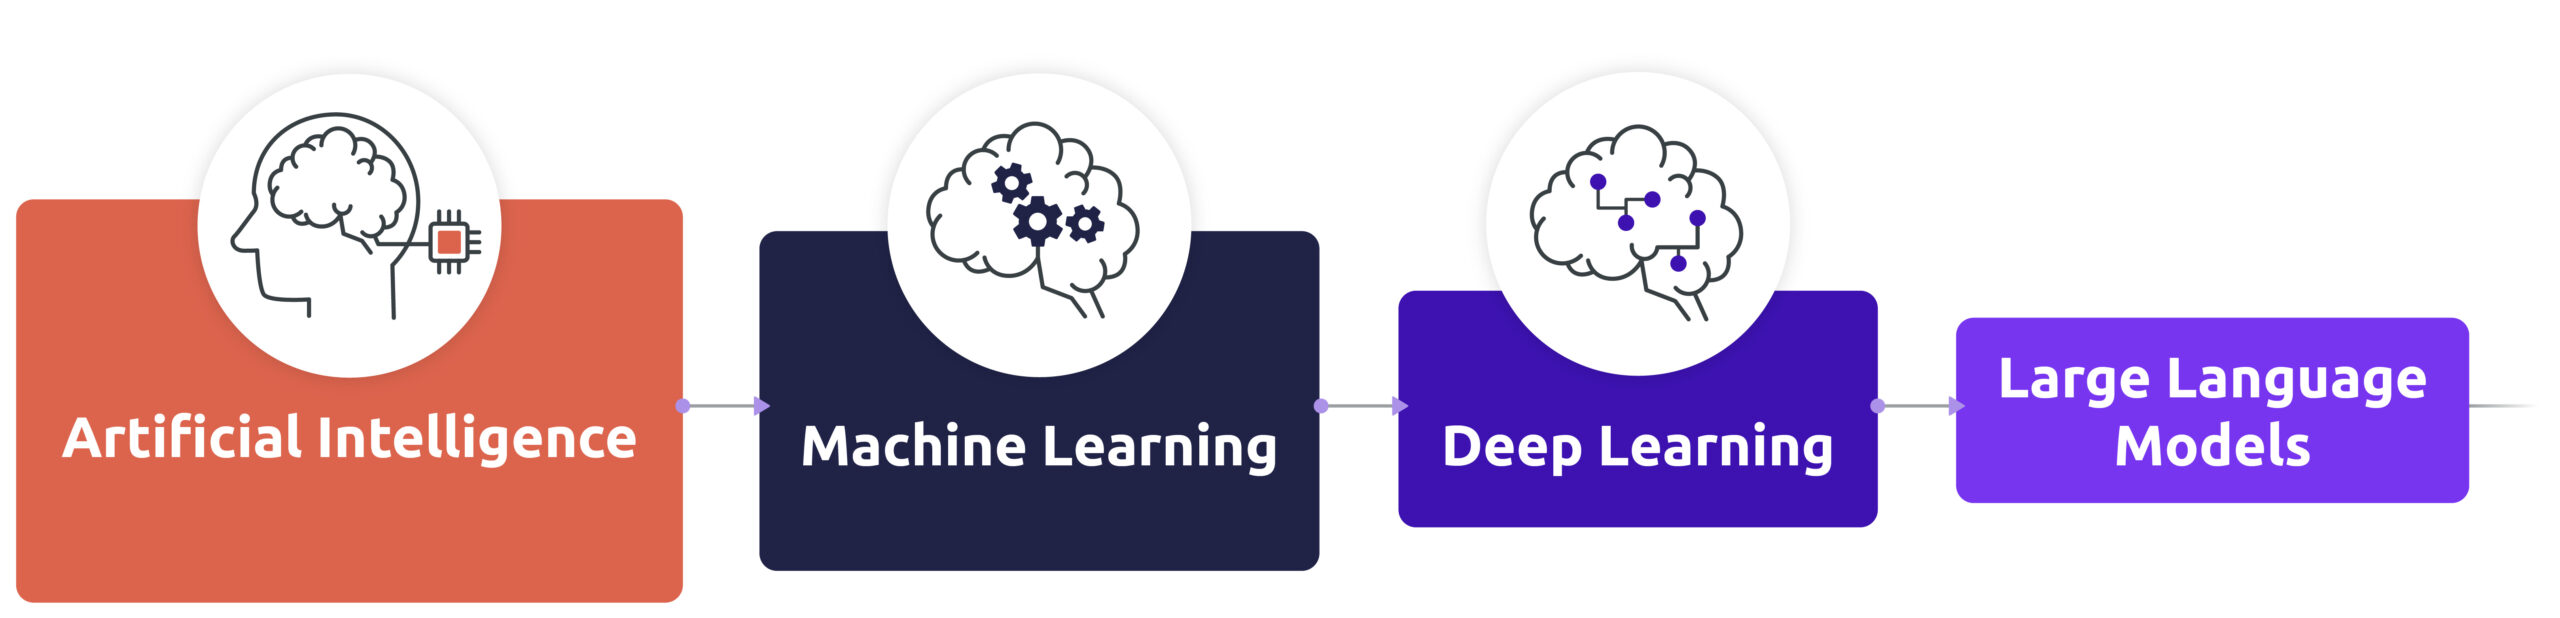 The different types of AIs supported by Diabolocom: Machine Learning, Deep Learning, Large Language Models